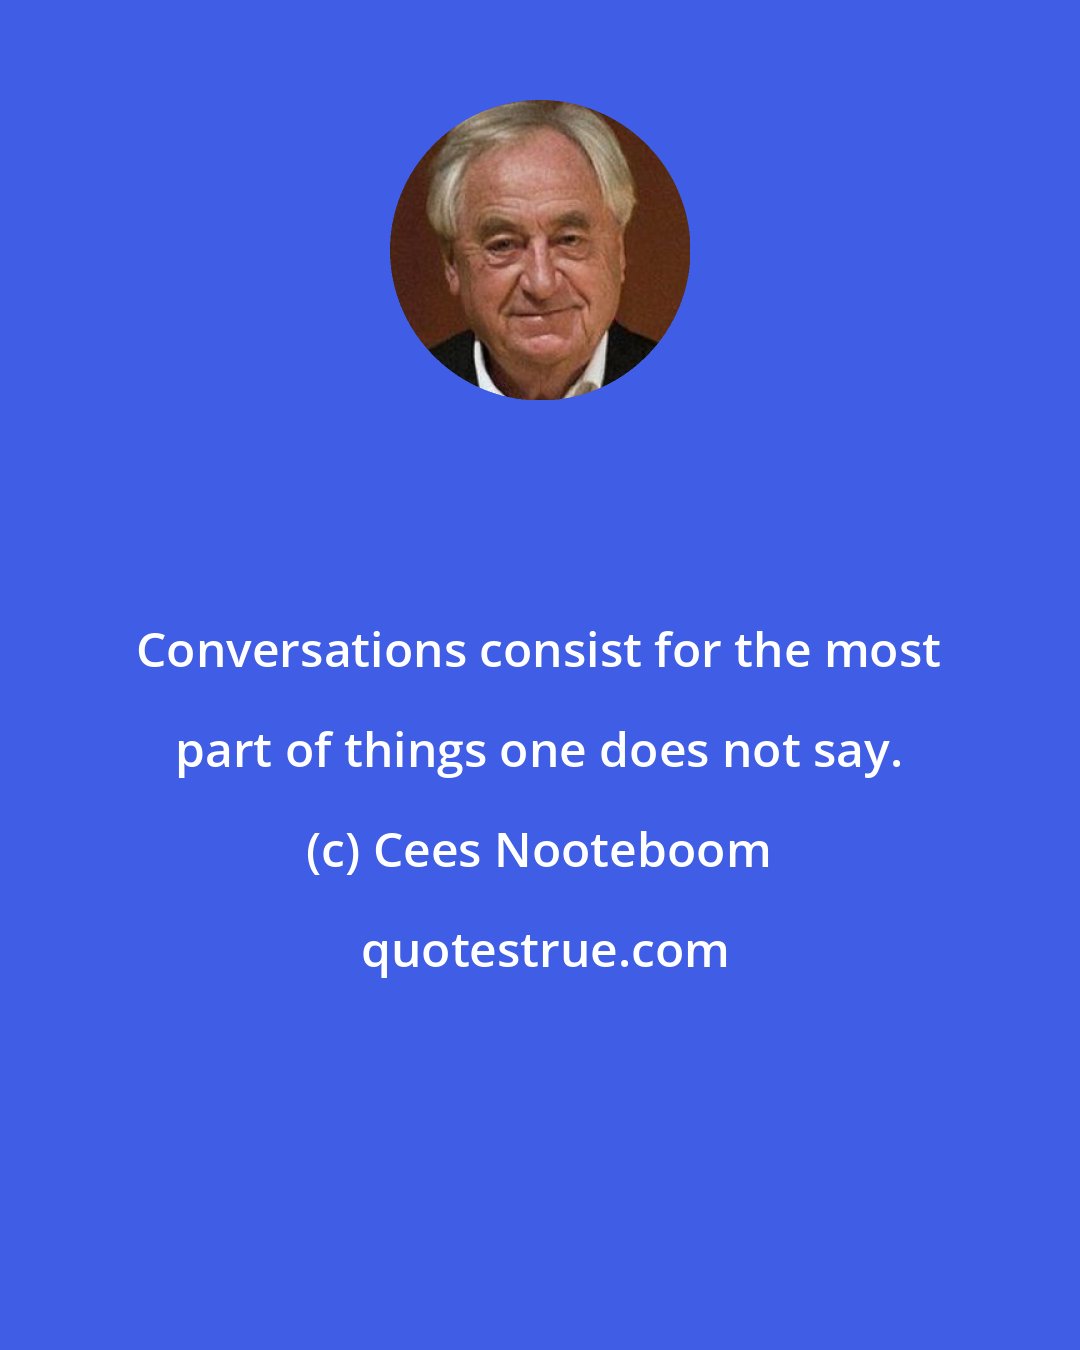 Cees Nooteboom: Conversations consist for the most part of things one does not say.